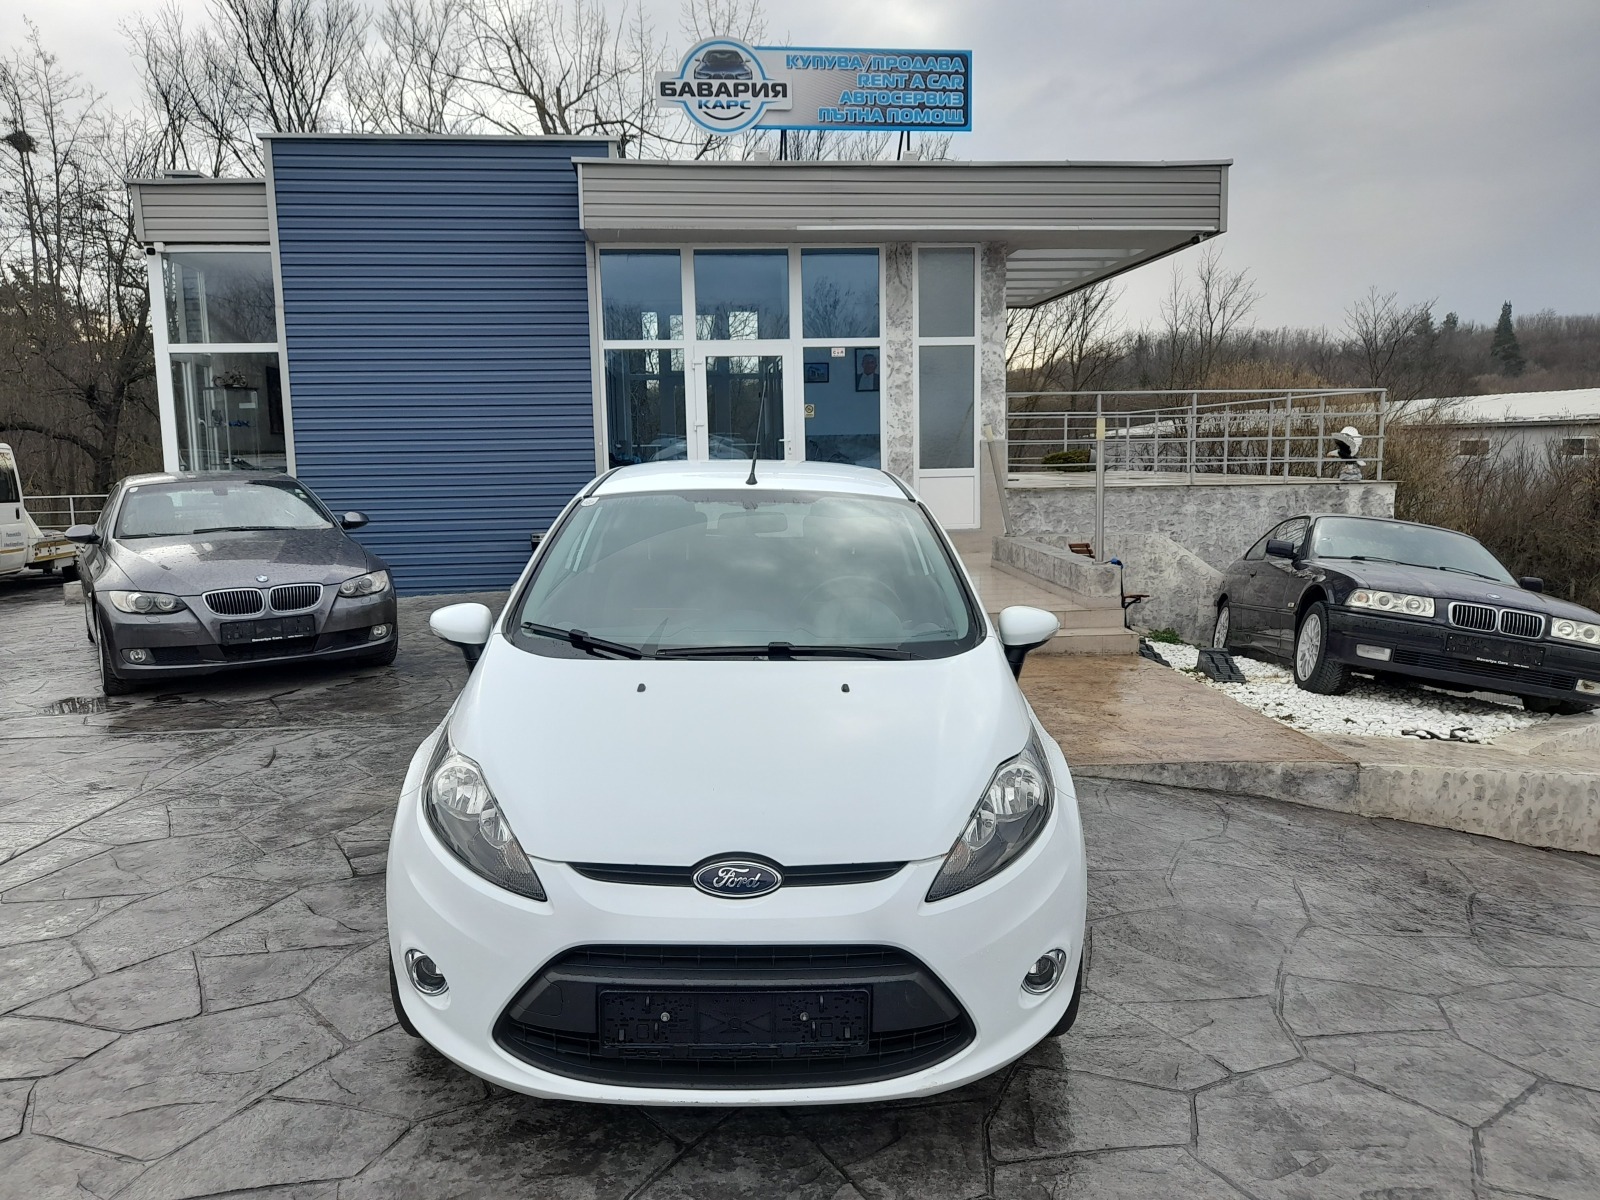 Ford Fiesta 1.2i COUPE TREND - изображение 1